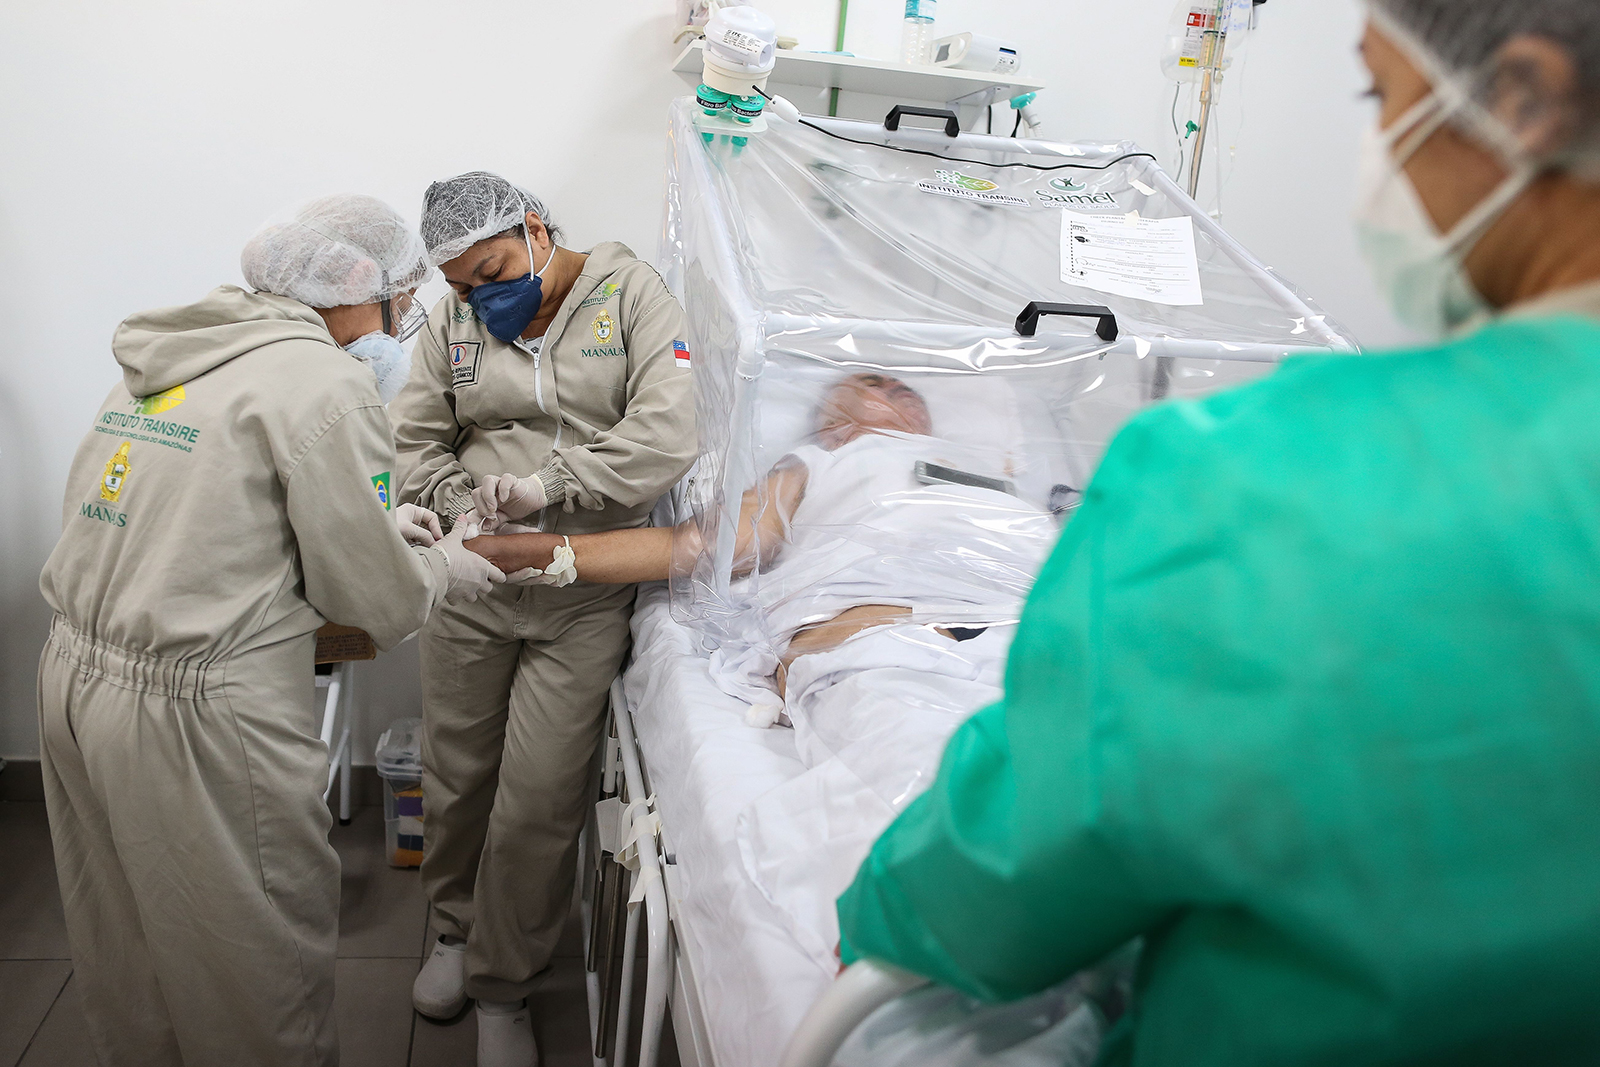 Health workers assist a Covid-19 patient at the Gilberto Novaes Municipal Hospital in Manaus, Brazil on June 8.